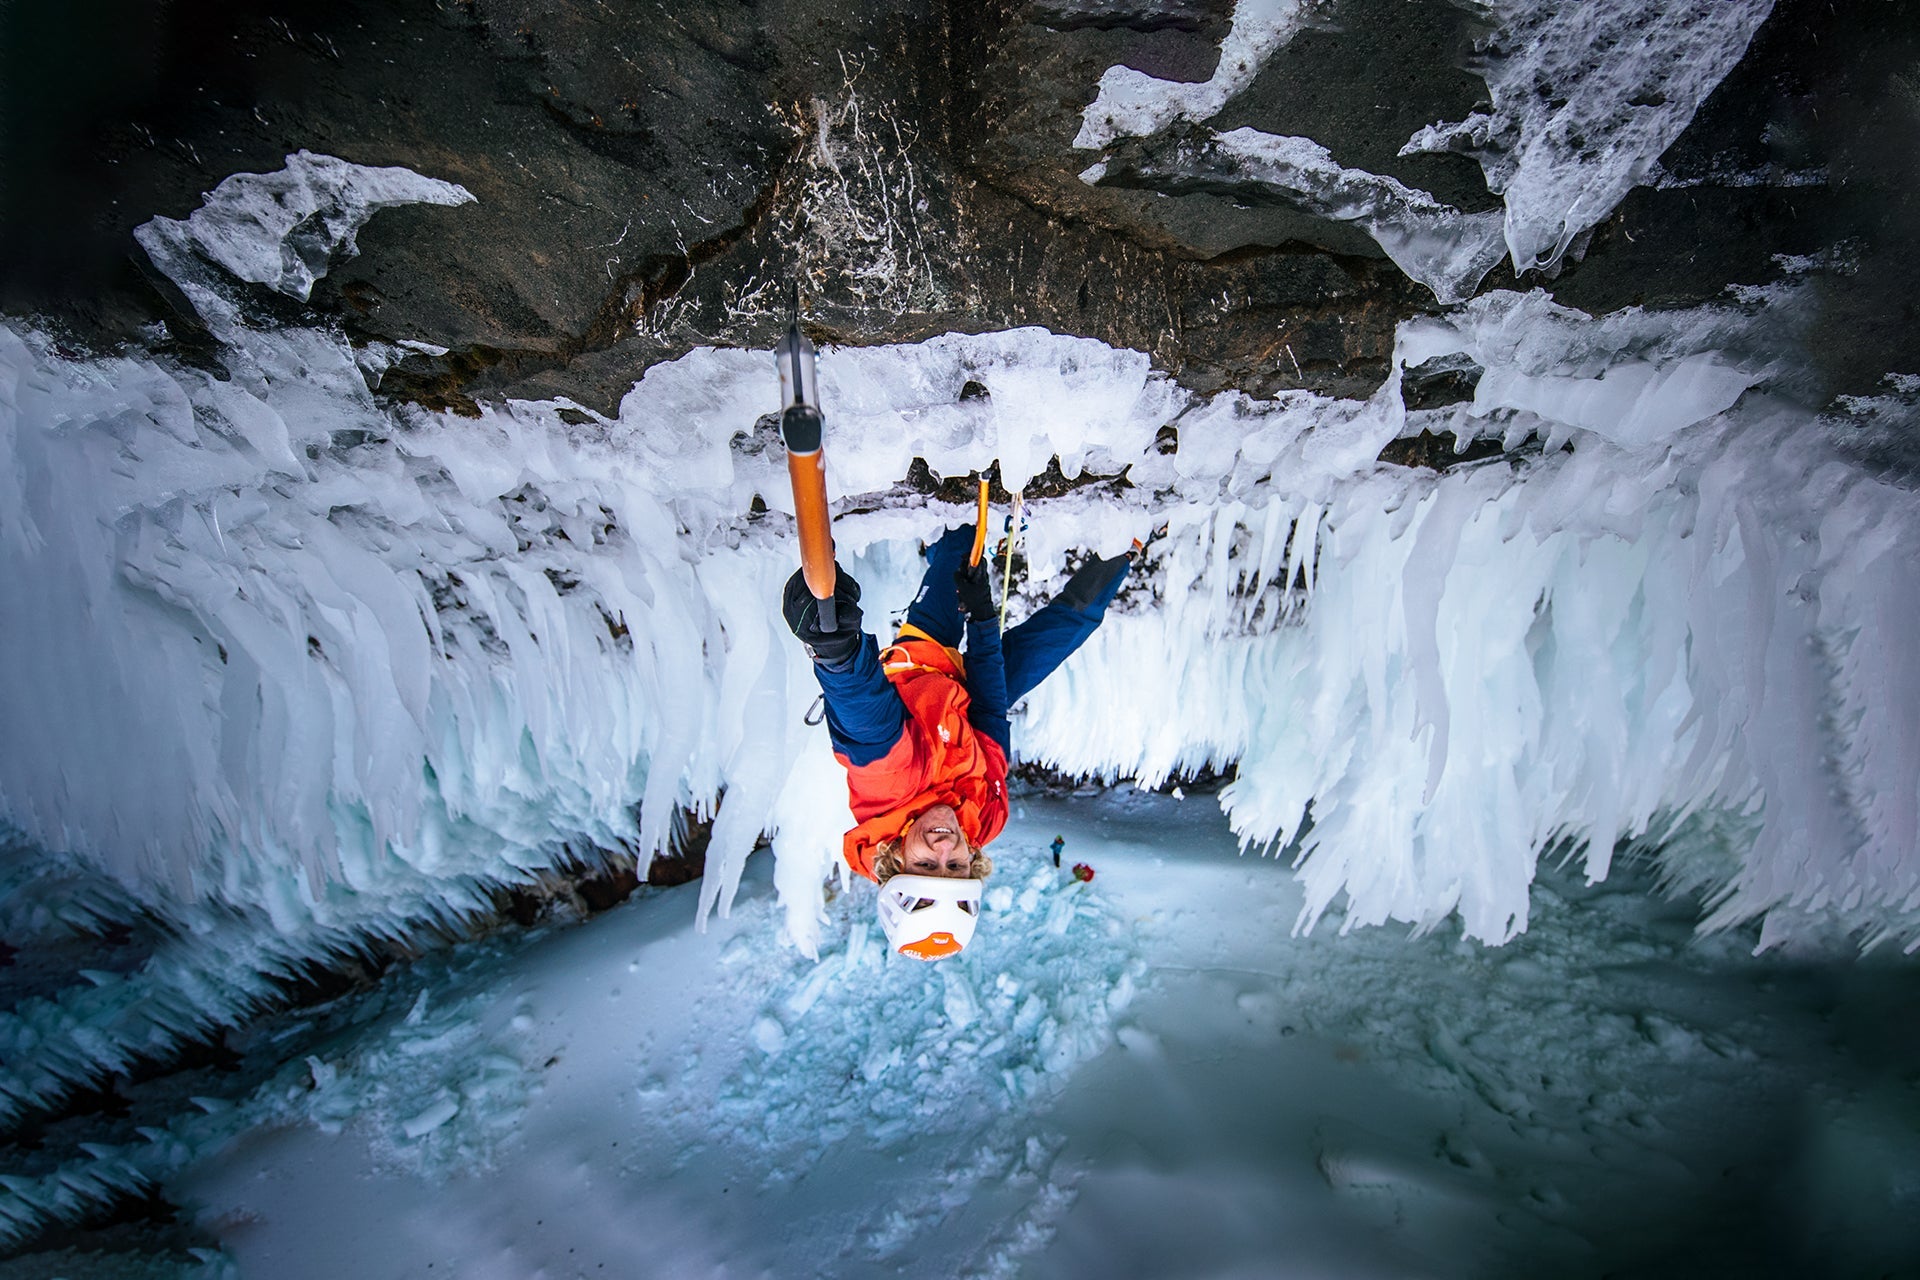 ice climber Tim Emmett dangles from an ice tool while climbing at Helmcken Falls in Western Canda